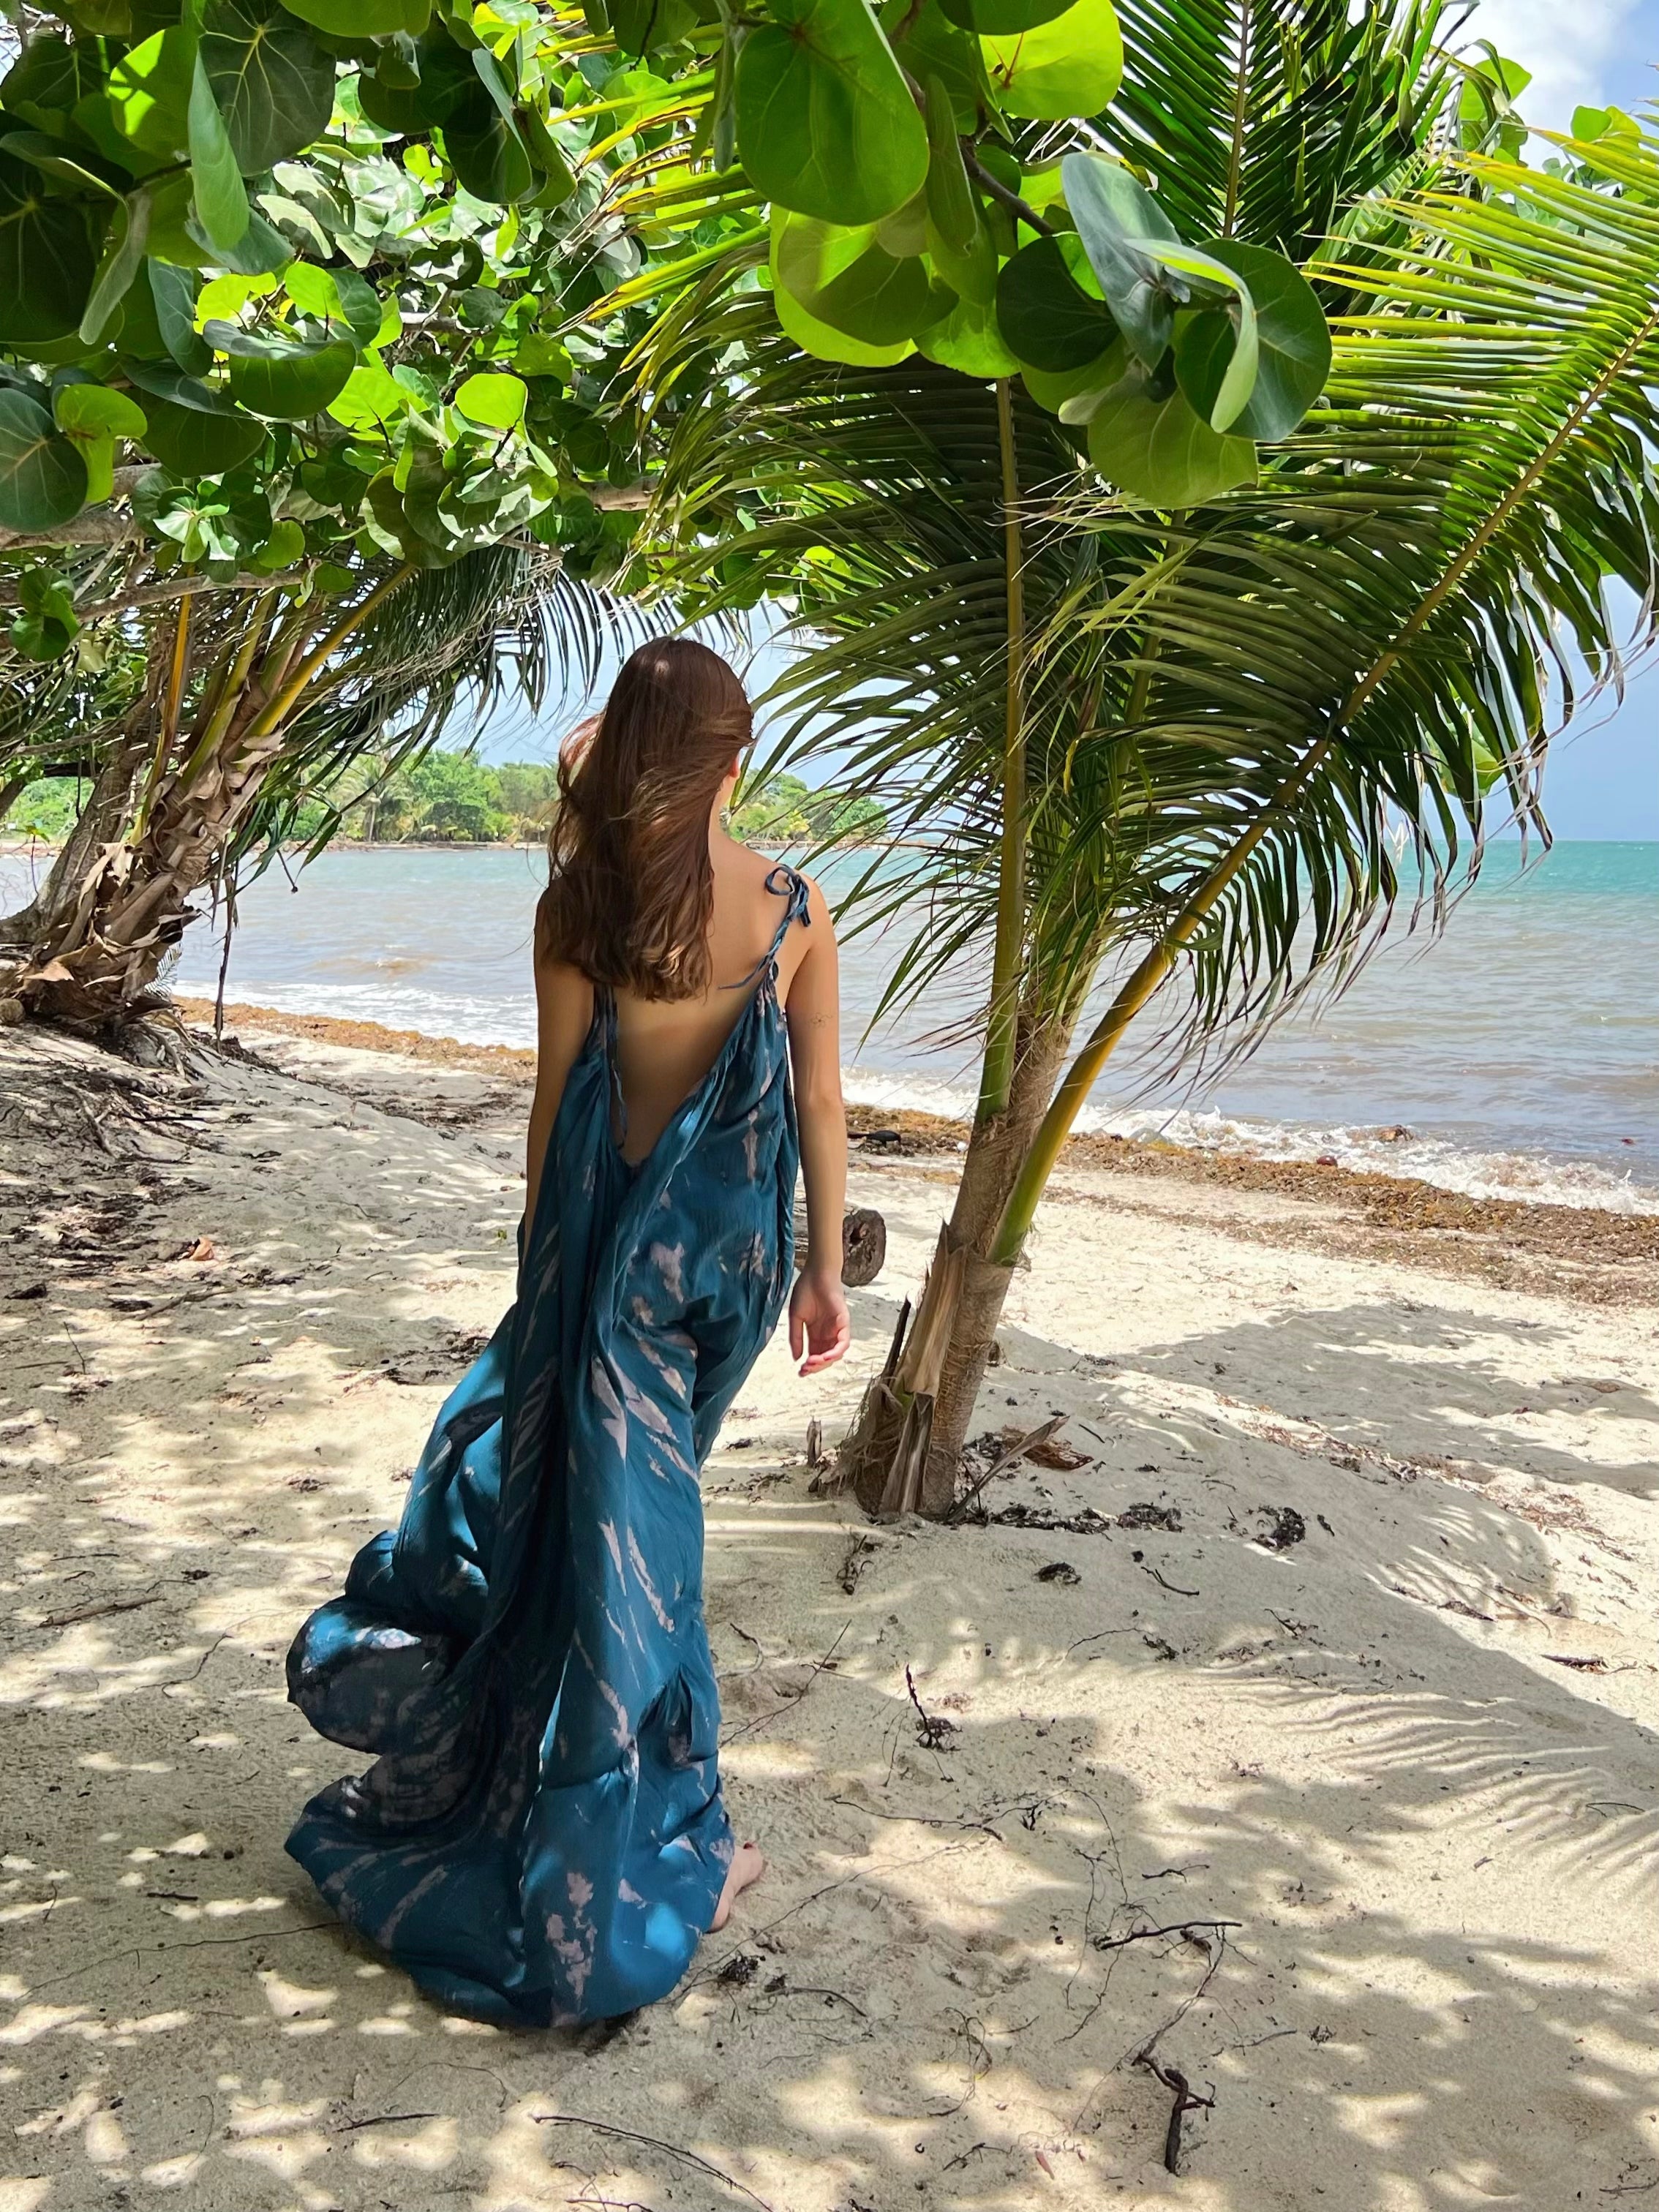 Shop Tie dye Backless Maxi Dress - Opened maxi Dress in Teal at Coco De Chom for next vacation now